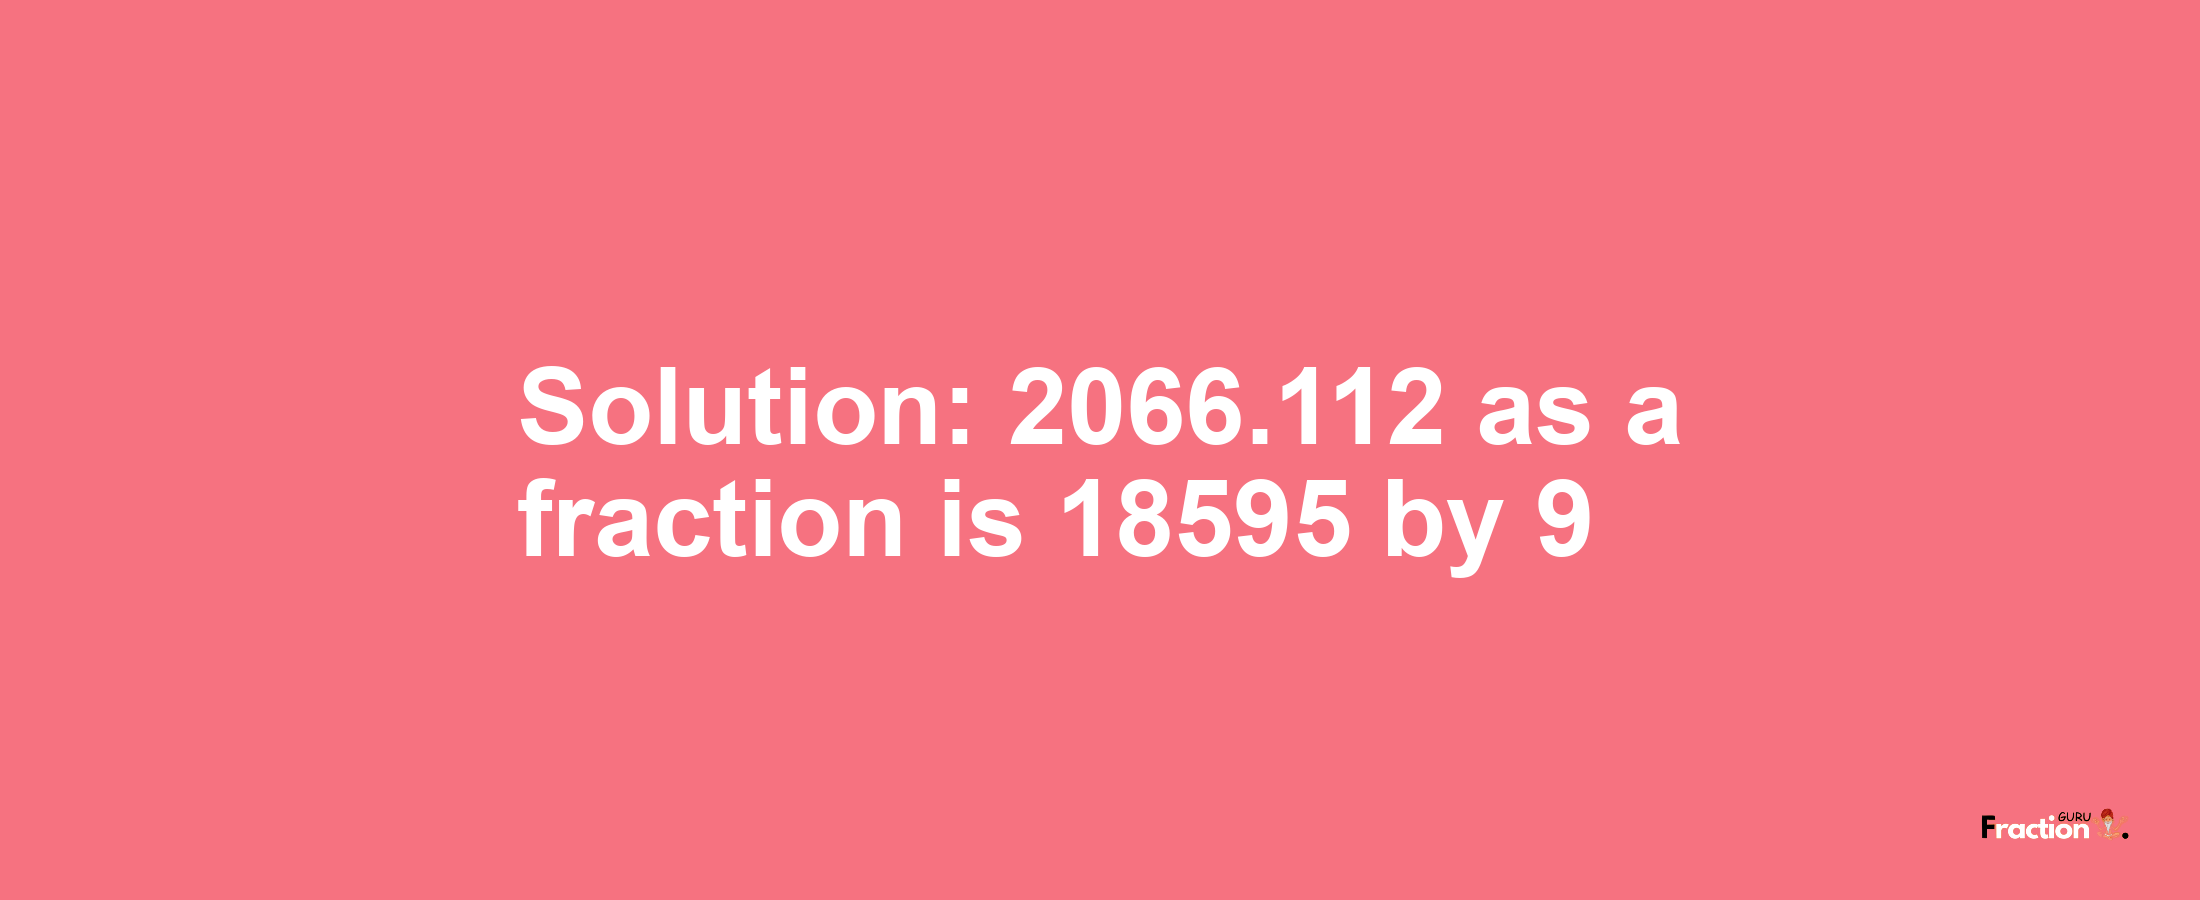 Solution:2066.112 as a fraction is 18595/9